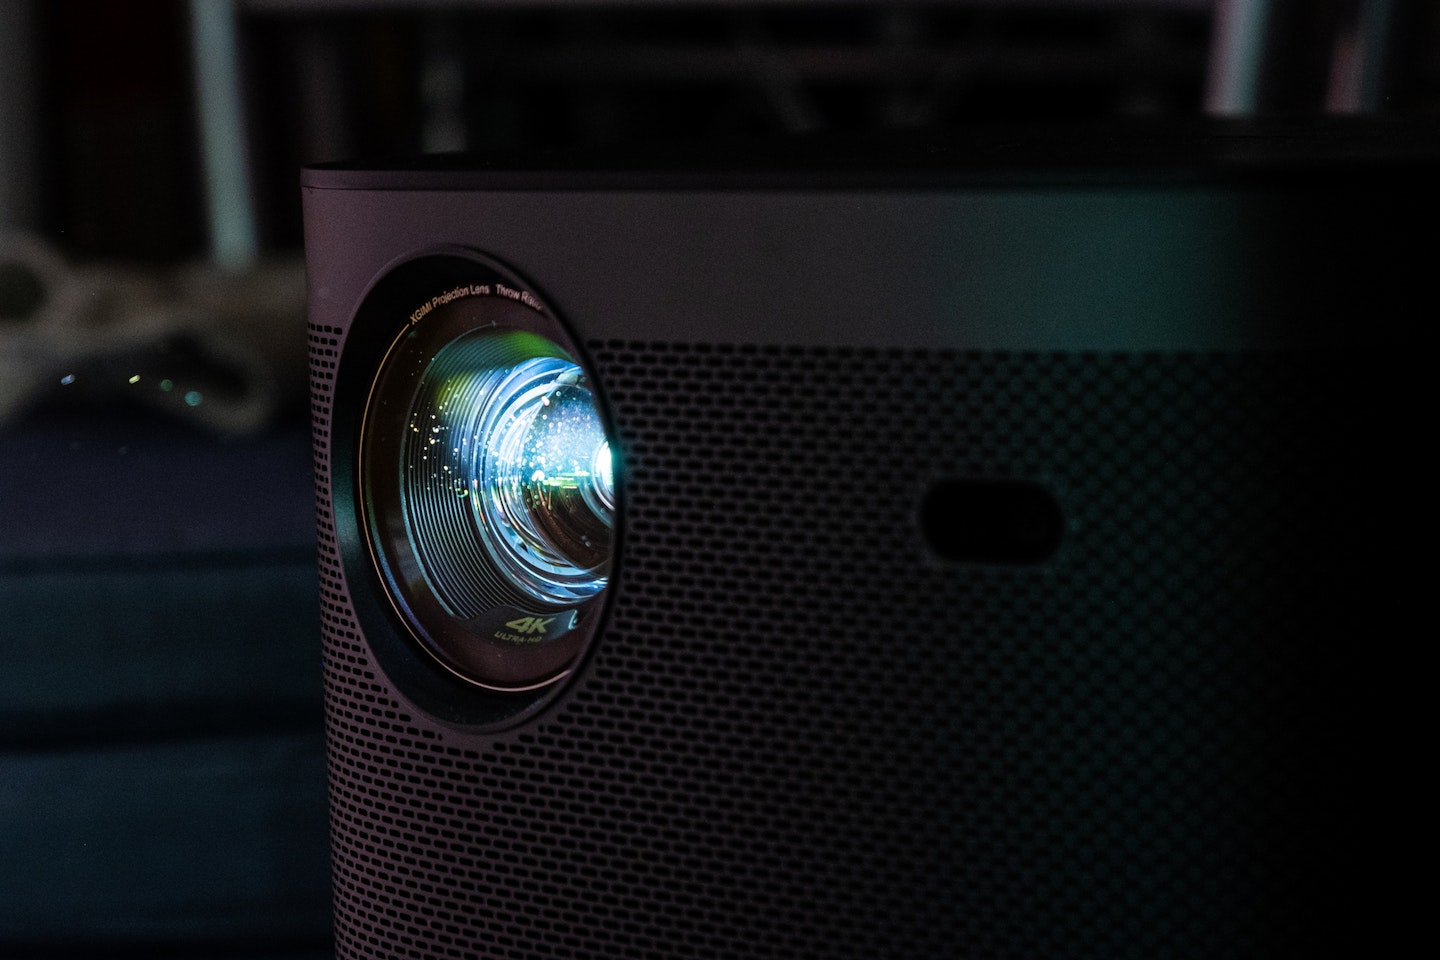 No need for a screen: XGIMI HORIZON Pro 4K Projector, Tech